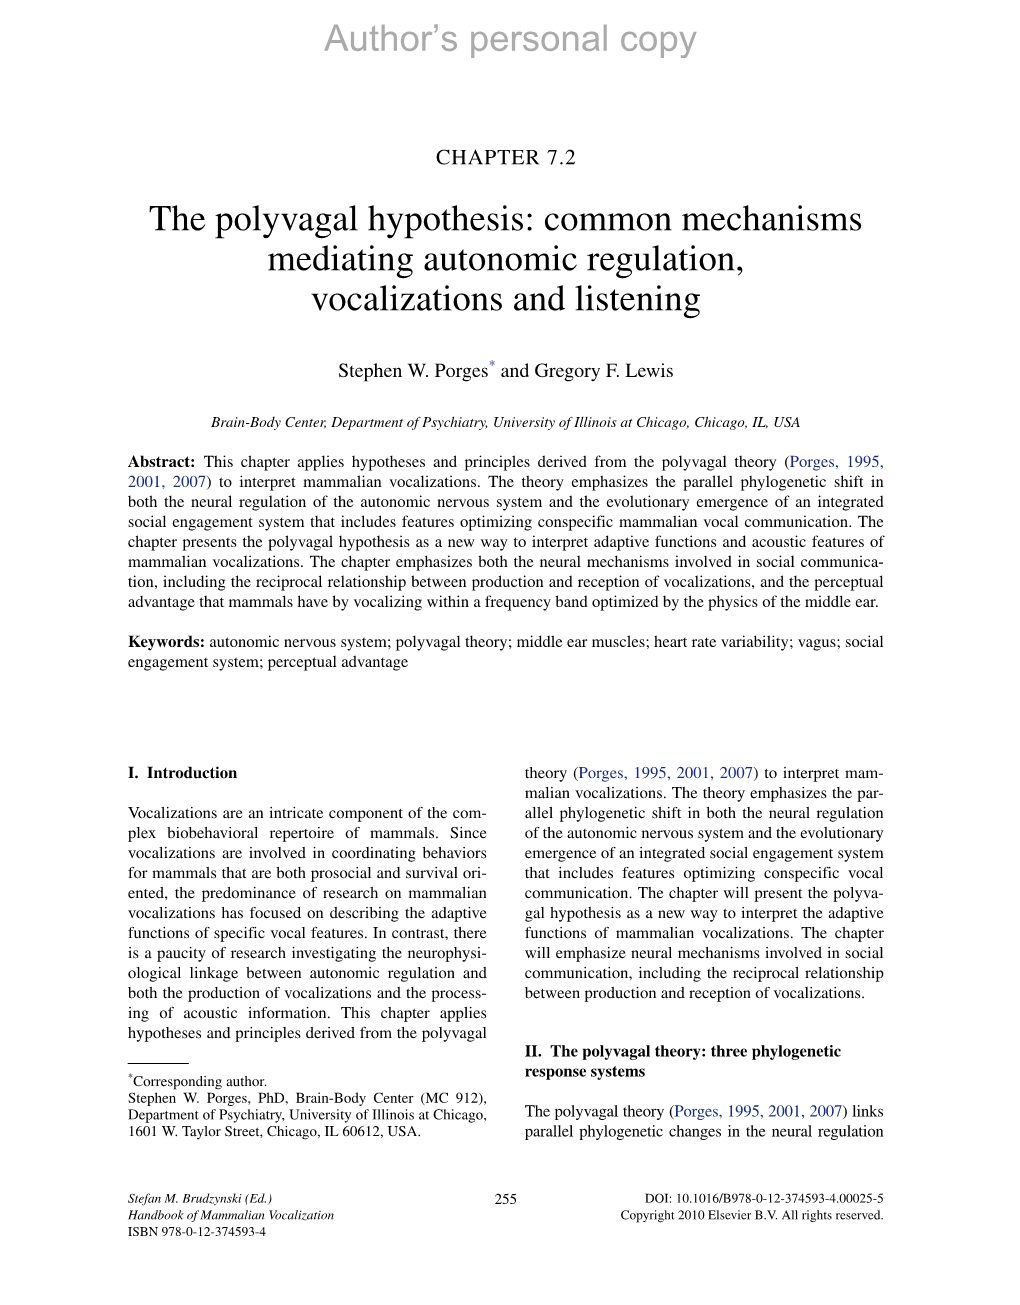 The Polyvagal Hypothesis: Common Mechanisms Mediating Autonomic Regulation, Vocalizations and Listening